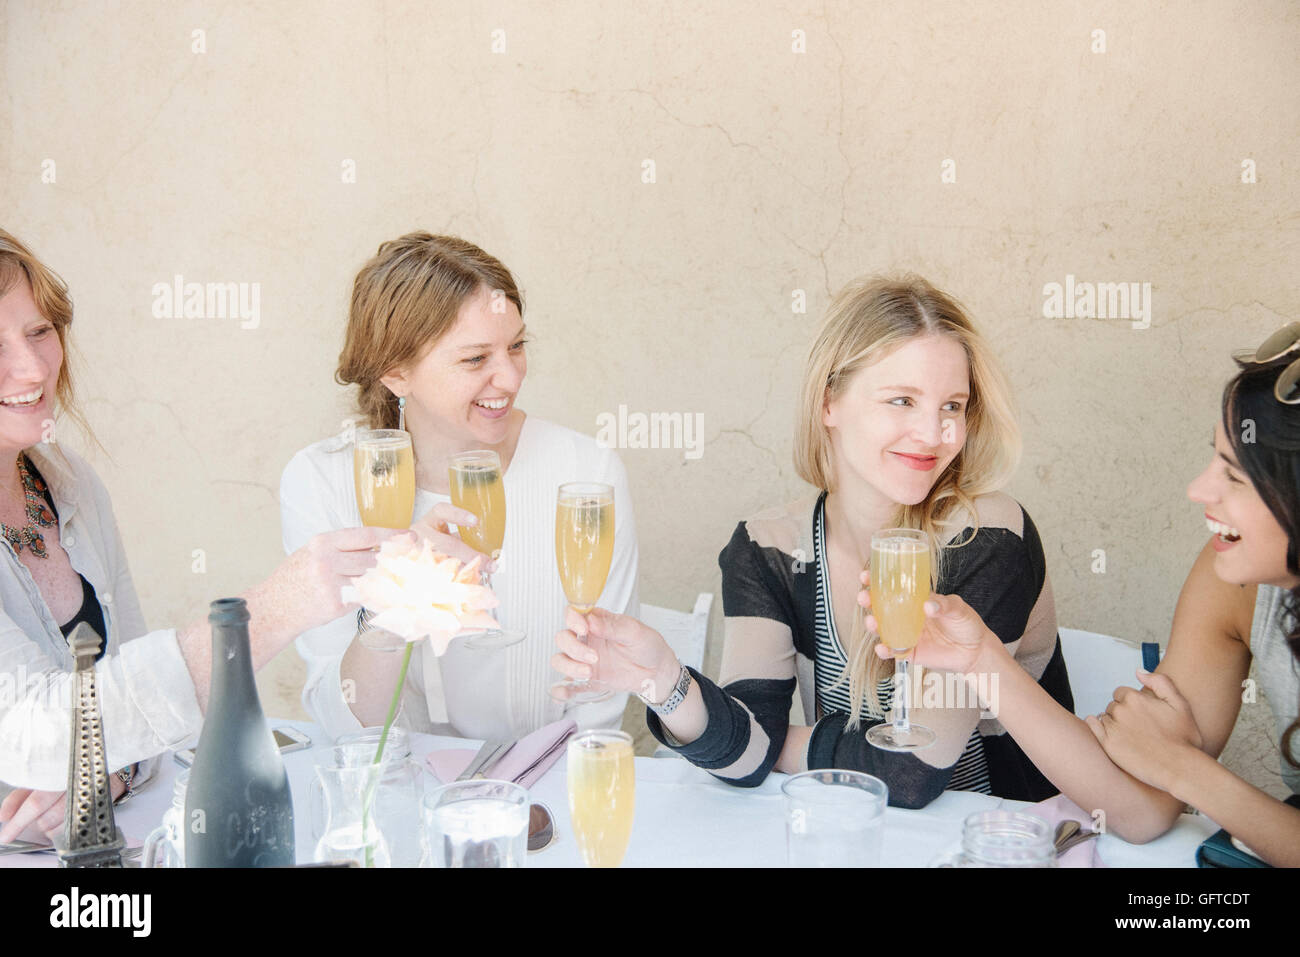 Four smiling women sitting at a table holding glasses of champagne toasting Stock Photo